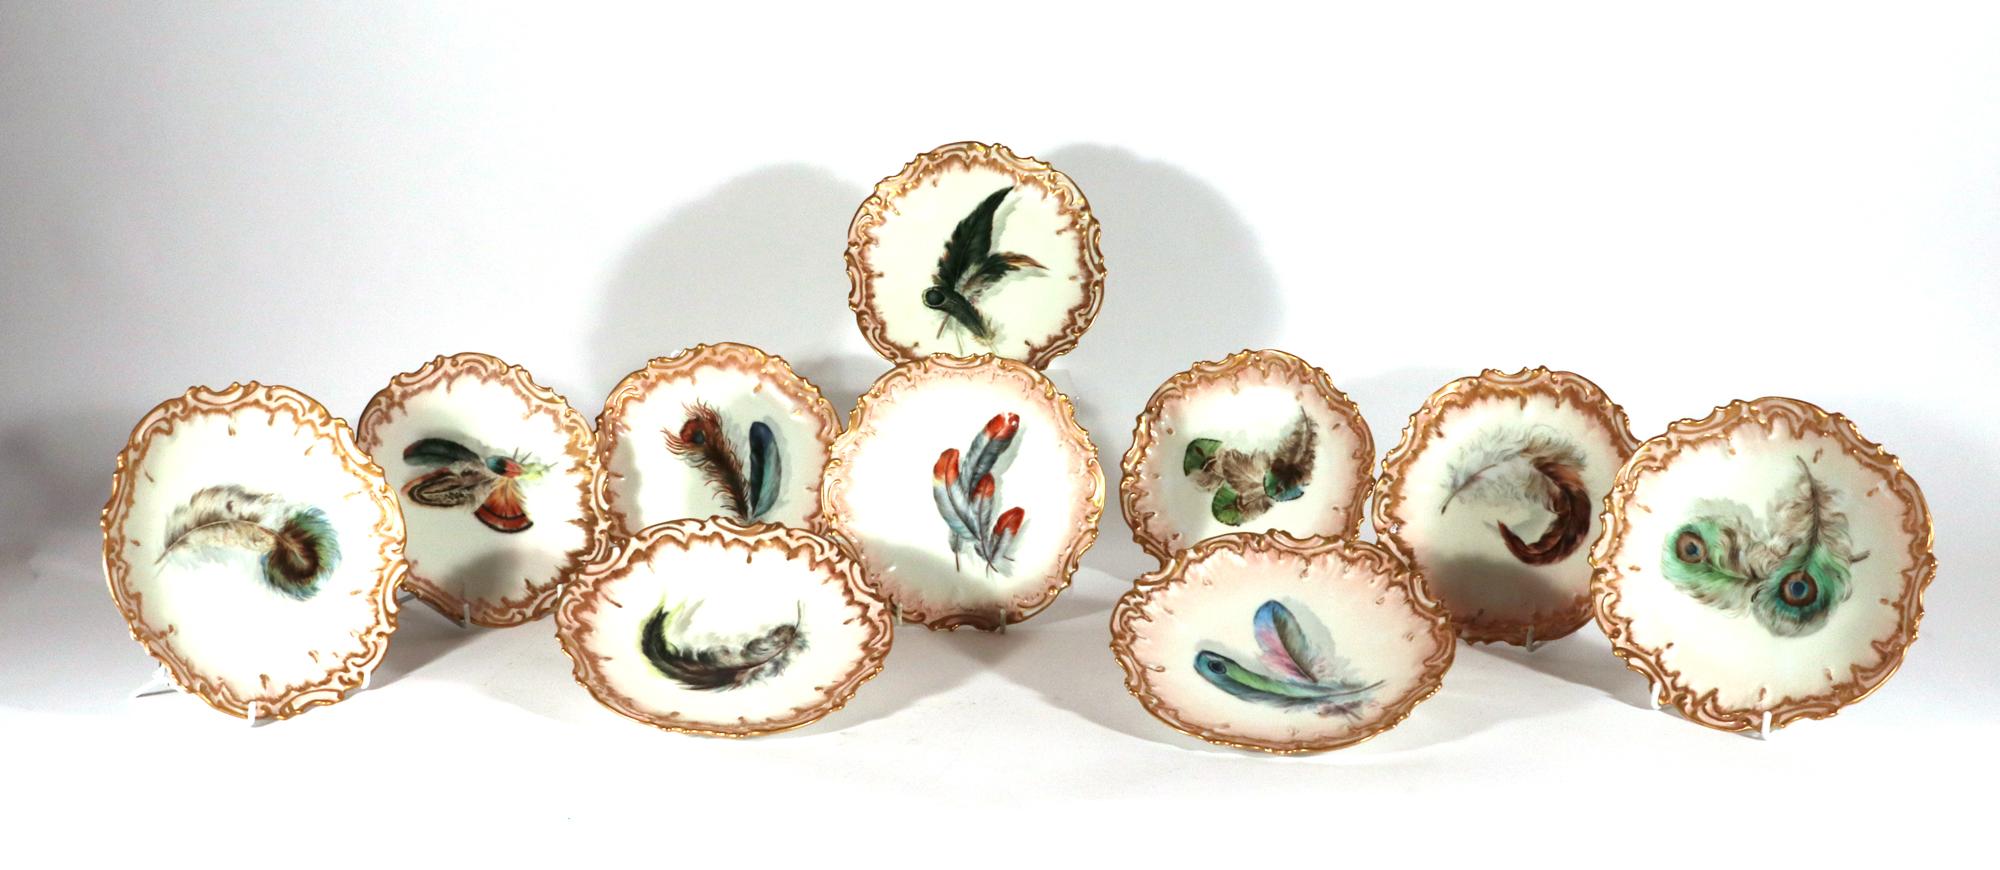 Limoges Porcelain Dessert Plates decorated with Feathers,
Set of Ten,
1891-1900

The Limoges porcelain plates are each painted with bird feather decoration, some with a single feather and some with multiple feathers.  The rim is shaped and molded